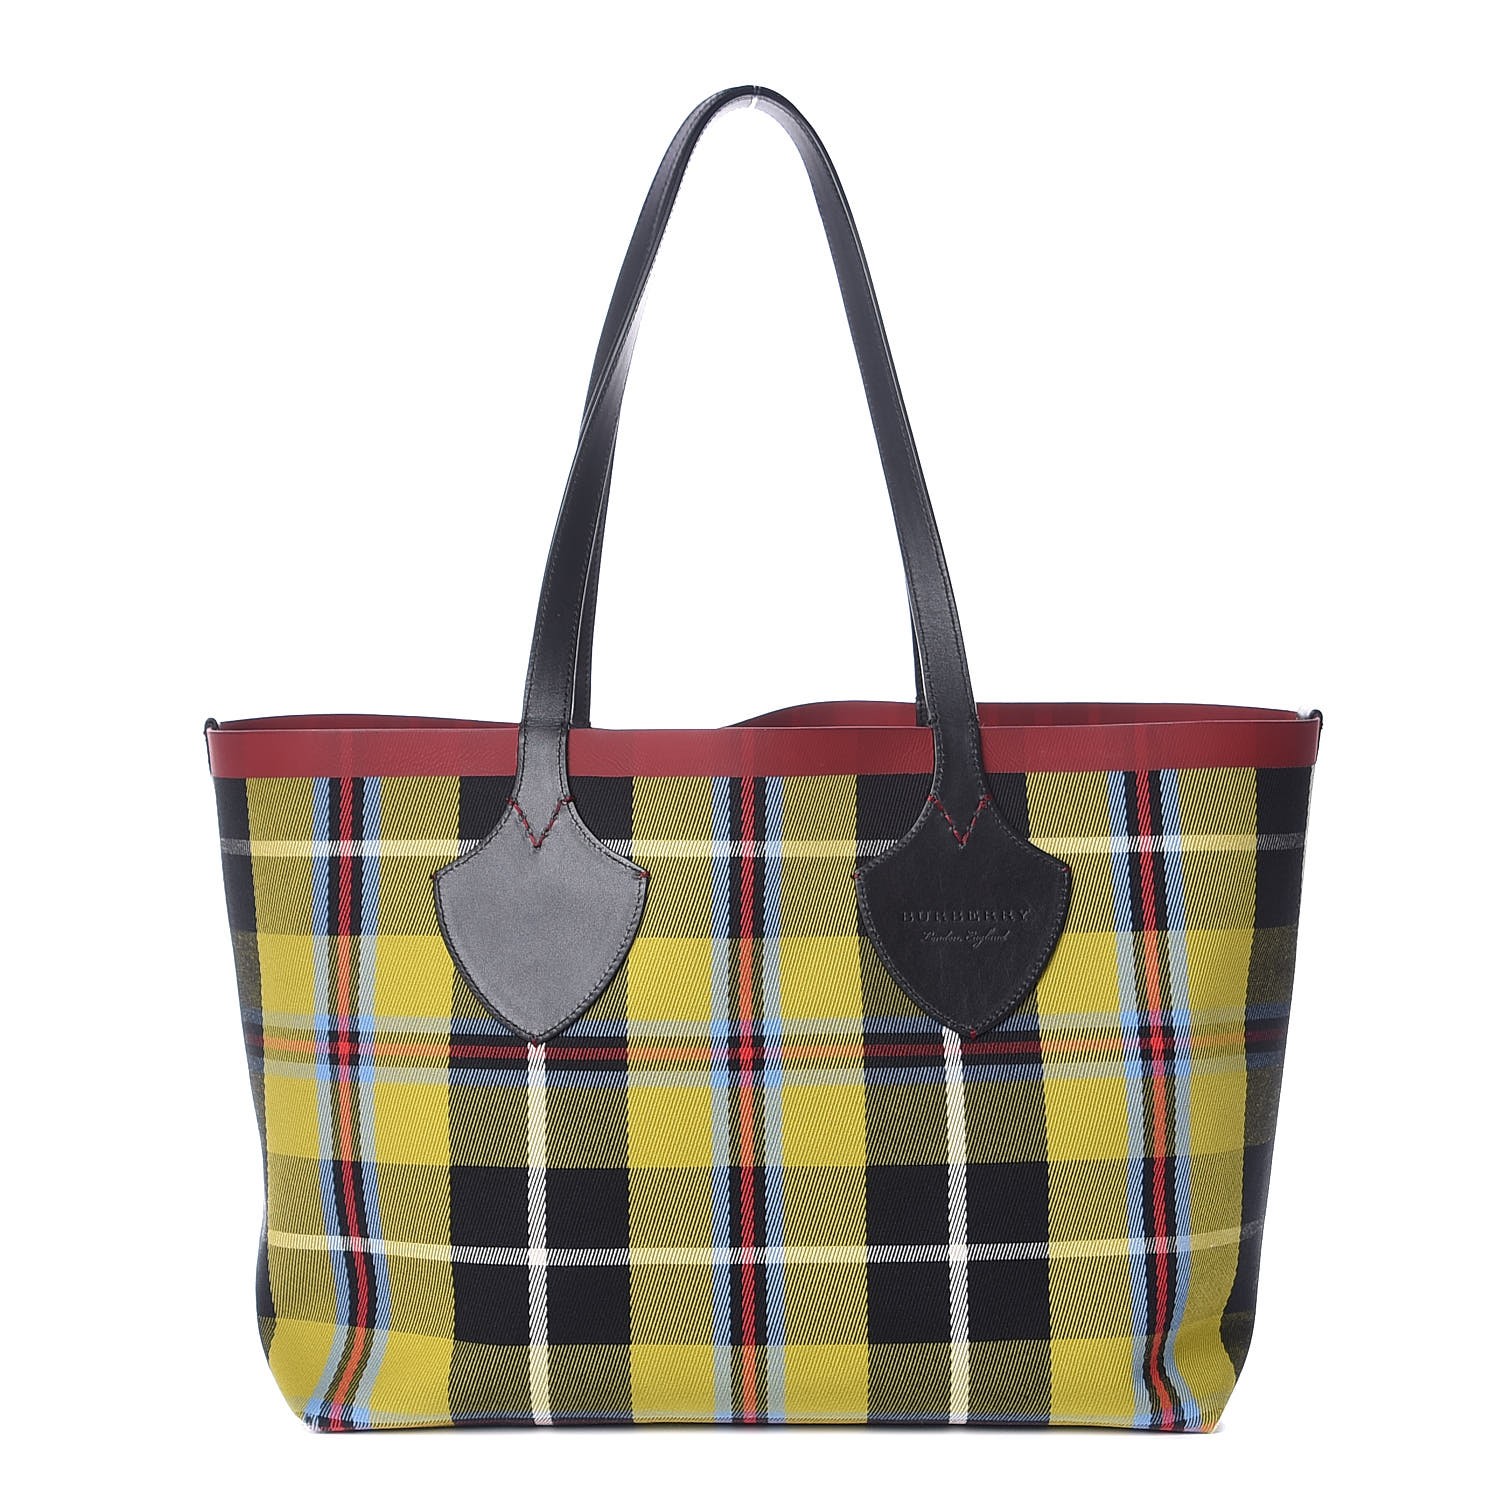 burberry giant tote